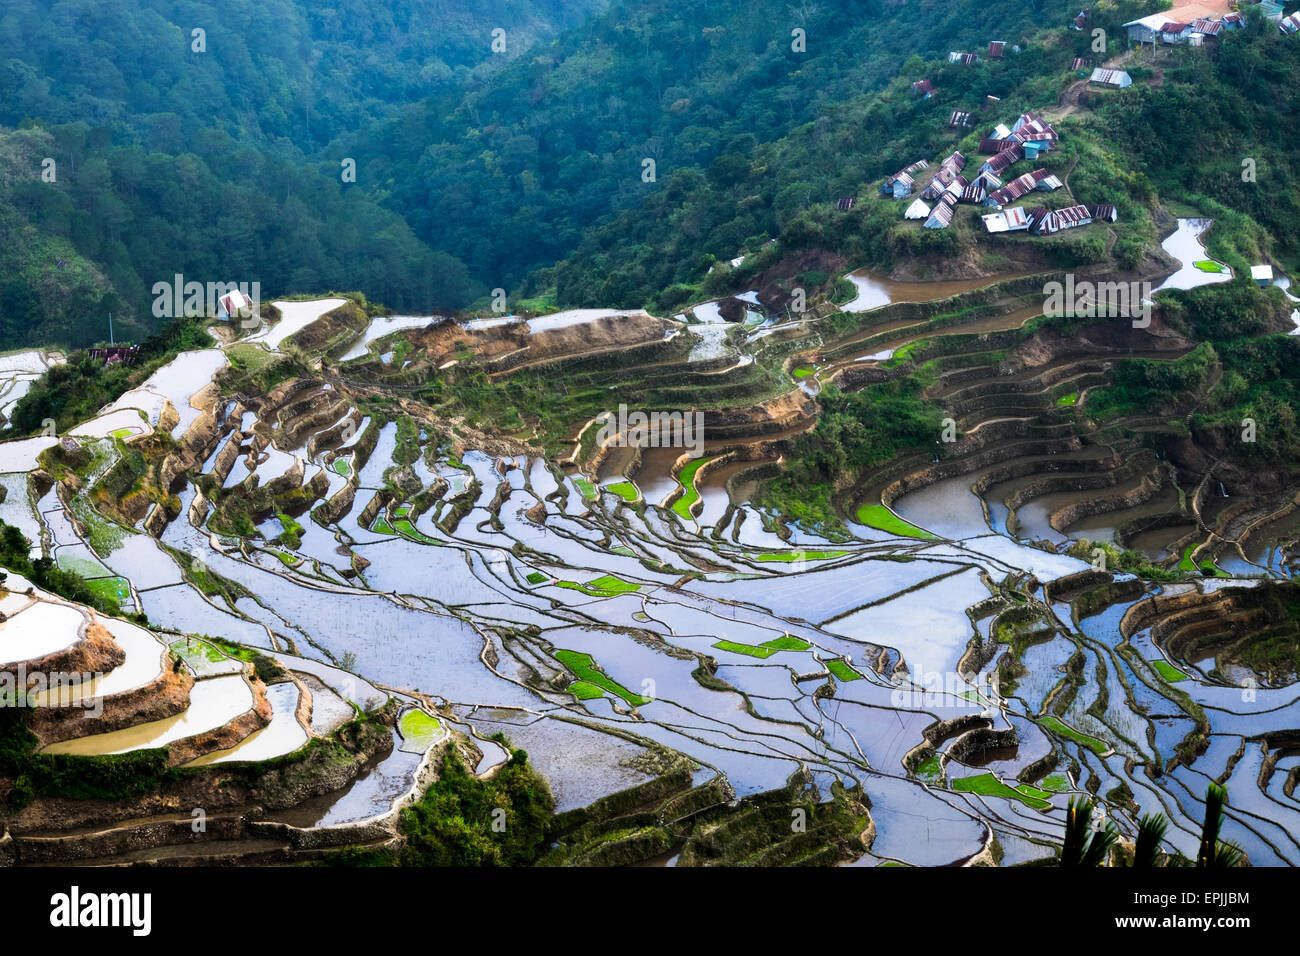 Village houses near rice terraces fields. Amazing abstract texture with sky colorful reflection in water. Ifugao province. Banau Stock Photo